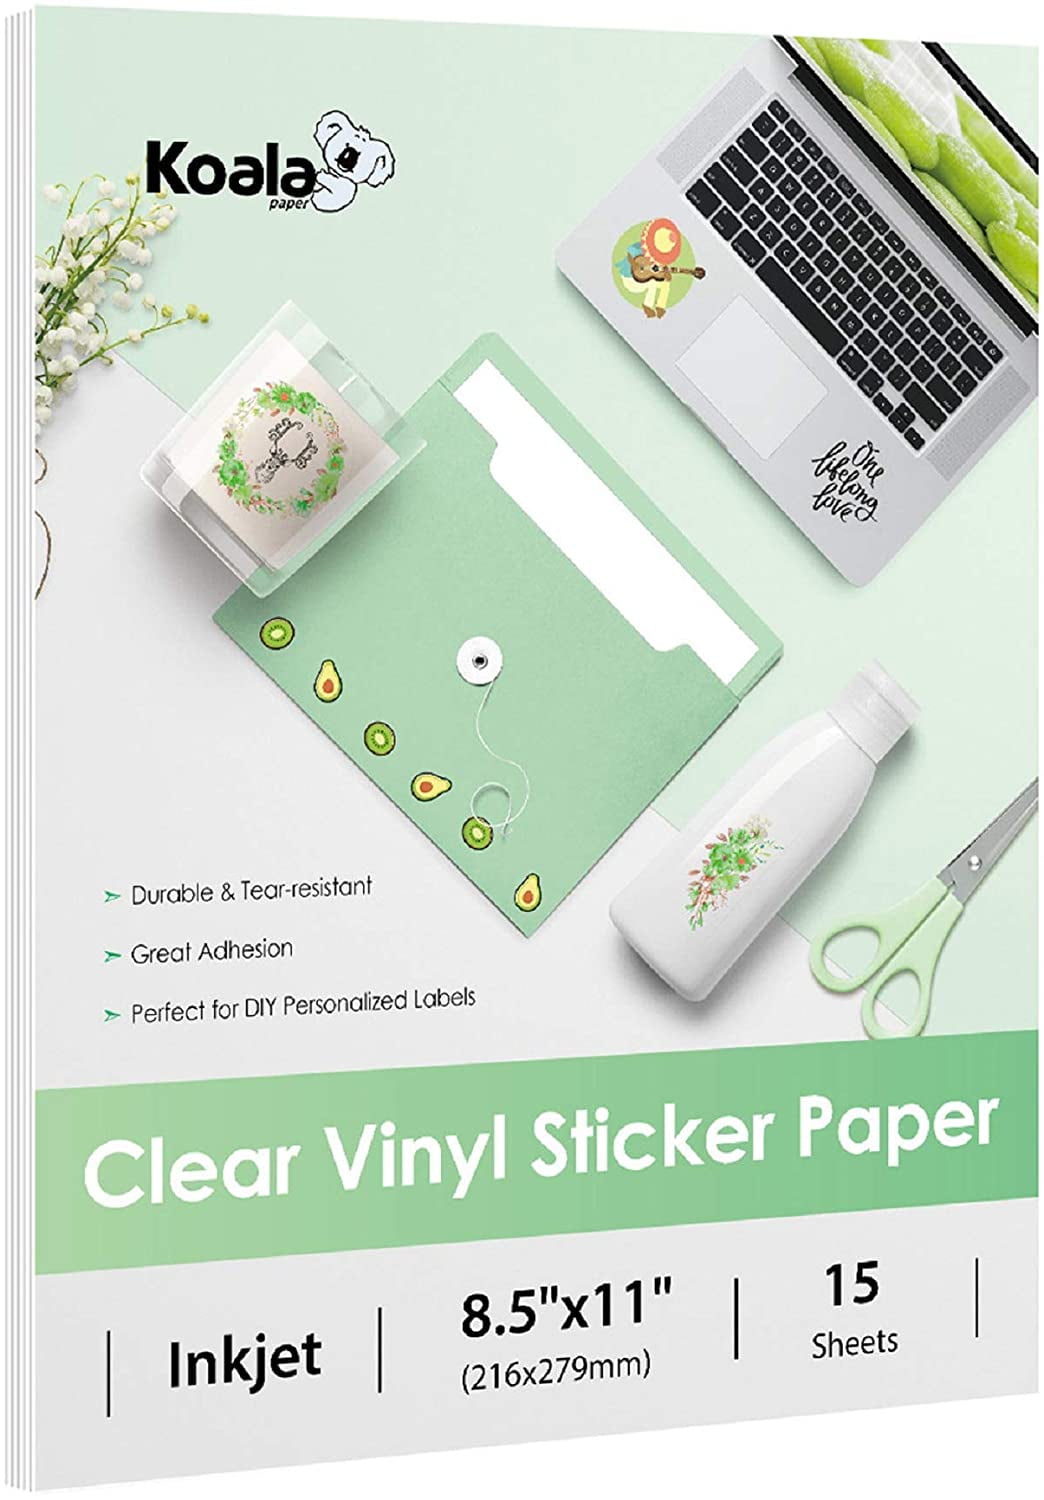 Gwybkq Clear Printable Vinyl Sticker Paper for Inkjet Printer,50 Sheets Transparent Decay Paper Clear Labels, Dries Quickly Vivi